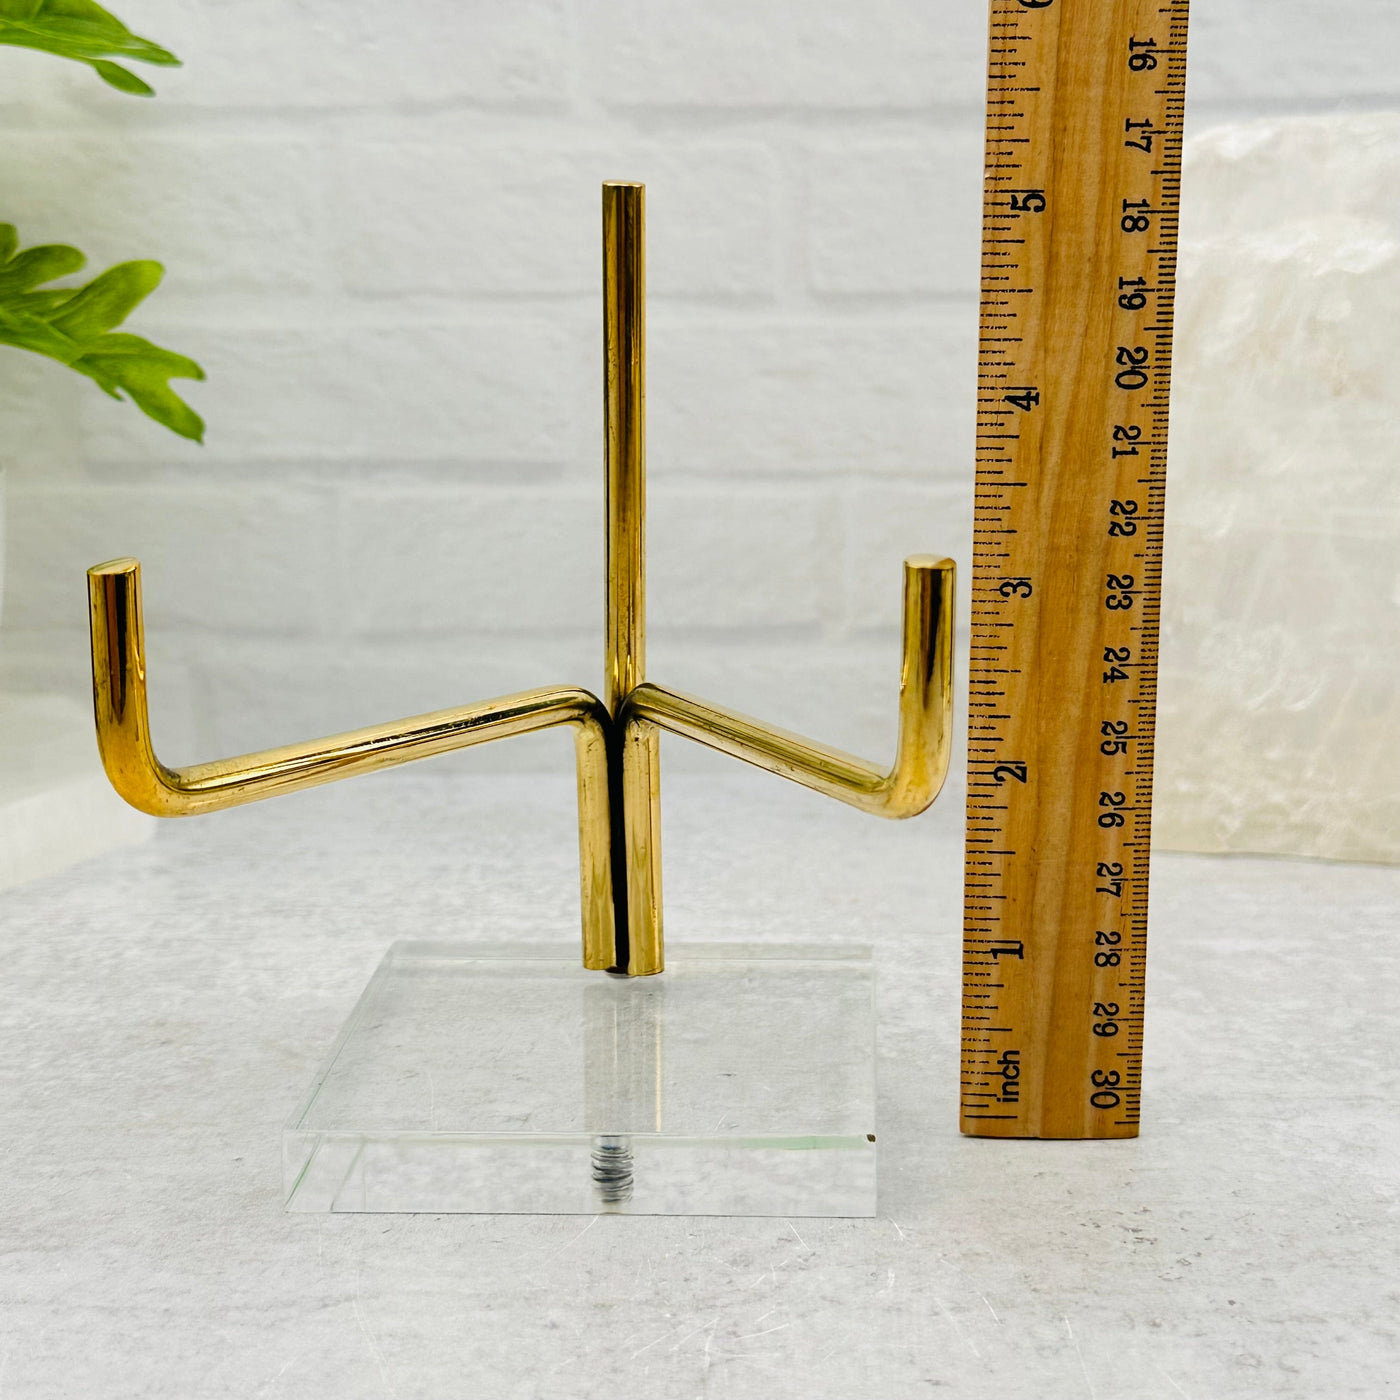 Crystal Stand - Acrylic Base and Brass Holder next to a ruler for size reference 